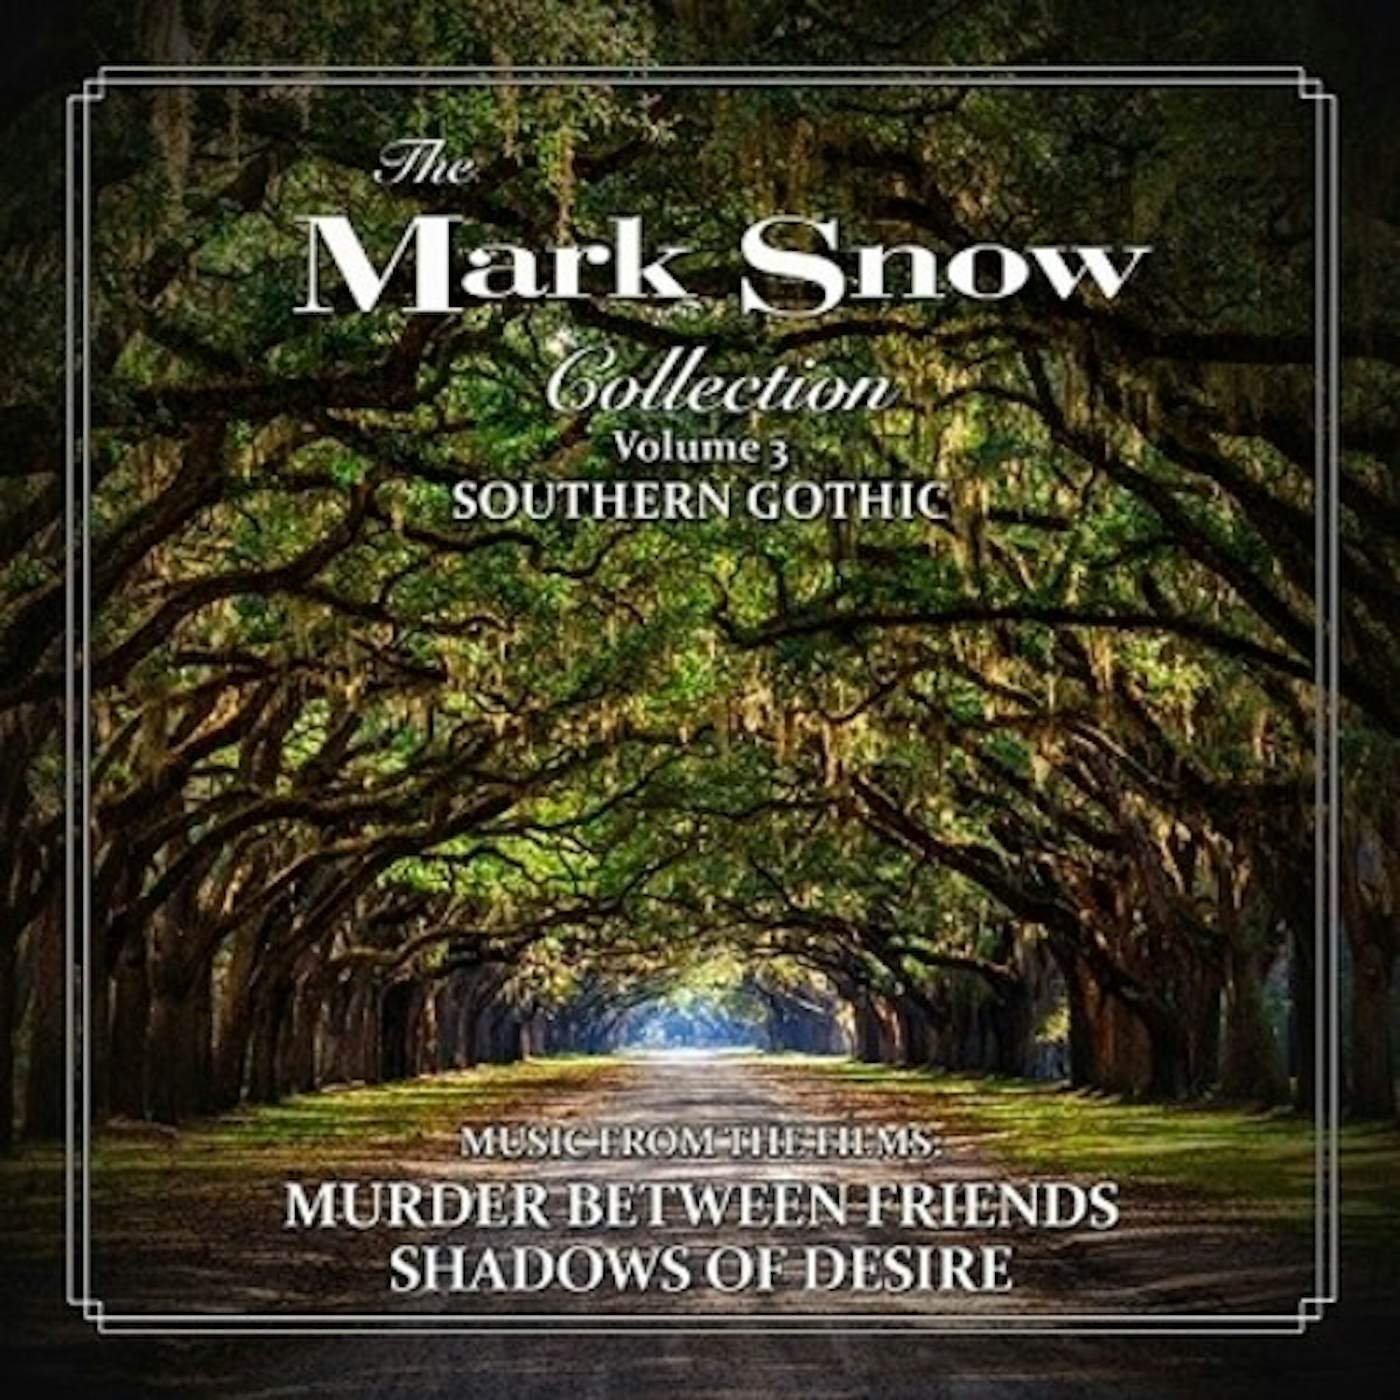 MARK SNOW COLLECTION: VOL 3 - SOUTHERN GOTHIC CD